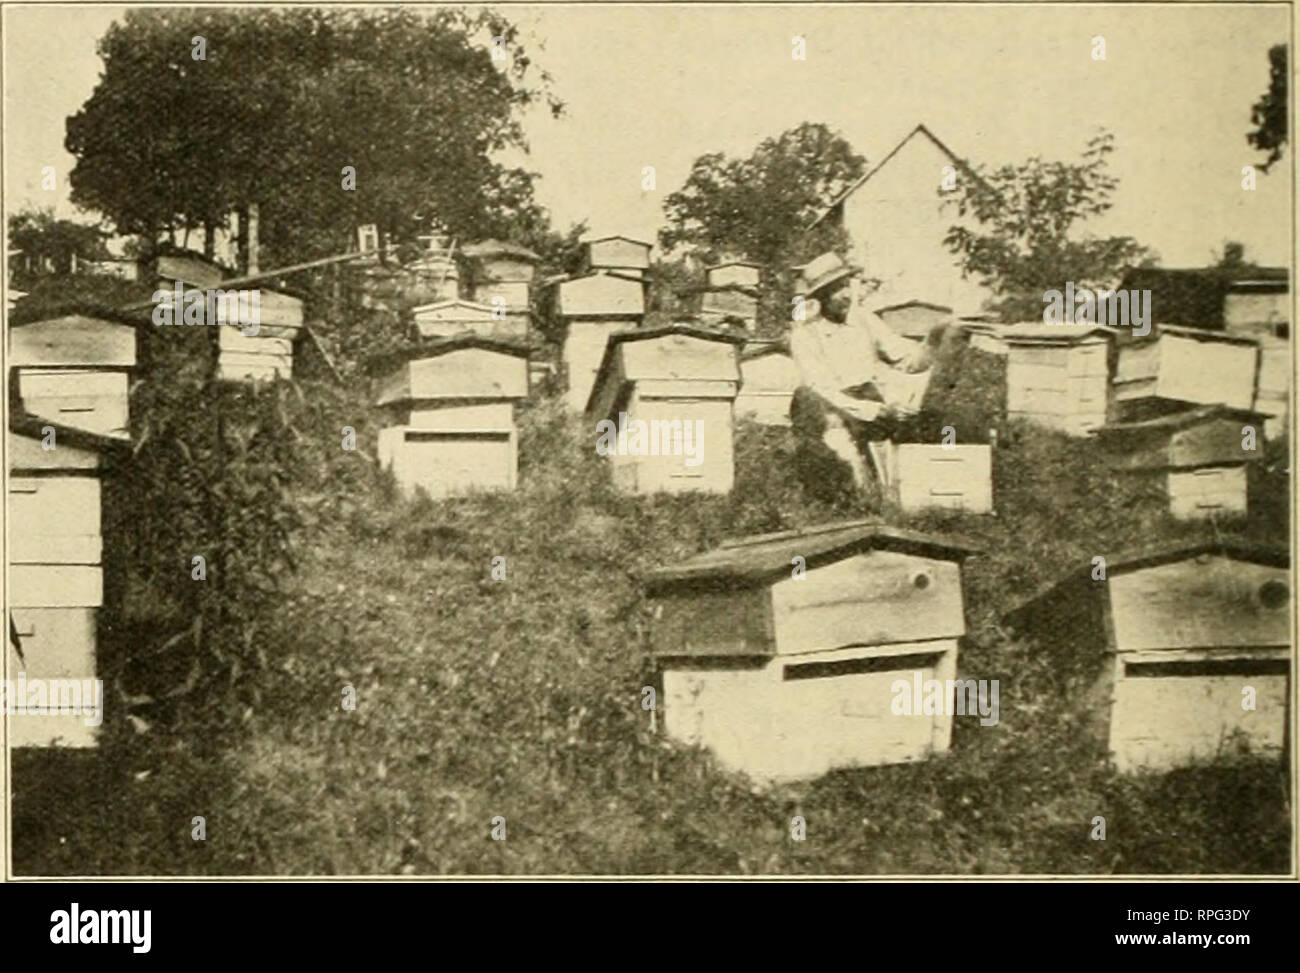 . American bee journal. Bee culture; Bees. 404 American Vee Journal Iowa State Beekeepers' Association, Des Moines, Iowa, Dec. 10, 11, and 12. Indiana State Association, Indiana- polis. Ind., Dec. 3. California State Beekeepers' Asso- ciation, Los Angeles, Calif., Dec. 9, 10, and 11. Southern Idaho and Eastern Oregon Beekeepers'Association,Ontario,Oreg., Dec. 9. Missouri State Beekeepers' Associa- tion, Excelsior Springs, Mo., Dec. 16 and 17. Chicago - Northwestern Beekeepers' Association, Chicago, Dec. 17 and 18. Northern California Association, Sacramento, Calif., Dec. 26 and 27. Washington  Stock Photo